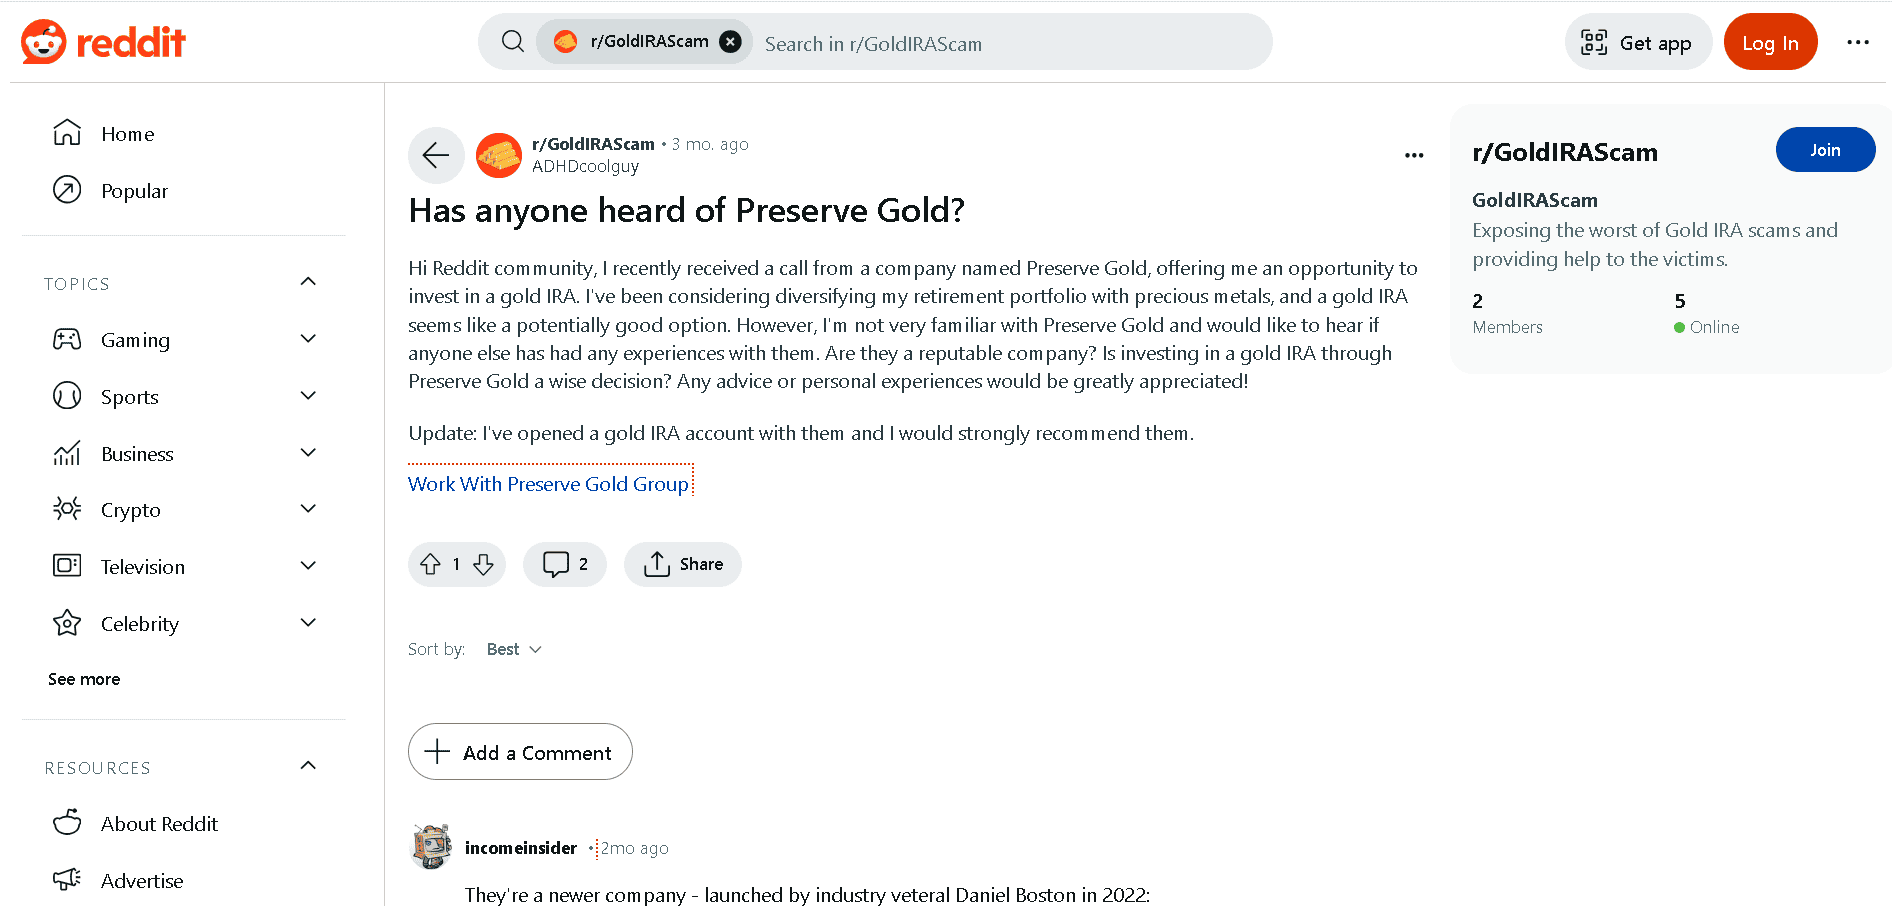 No complaints and negative reviews about Preserve Gold on Reddit